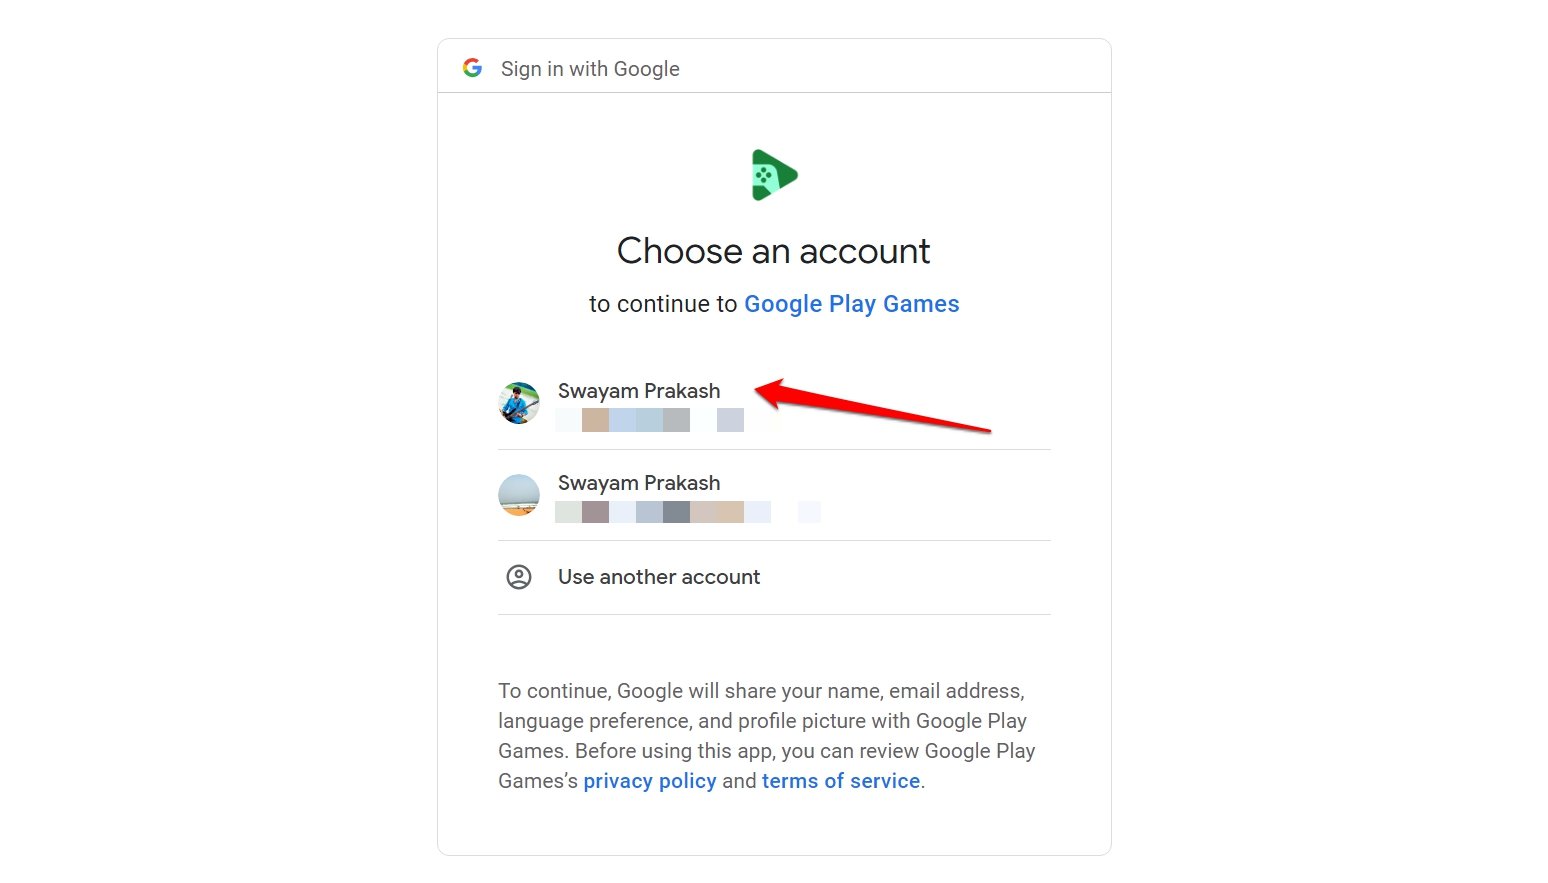 choose an account to sign into Google Play Games